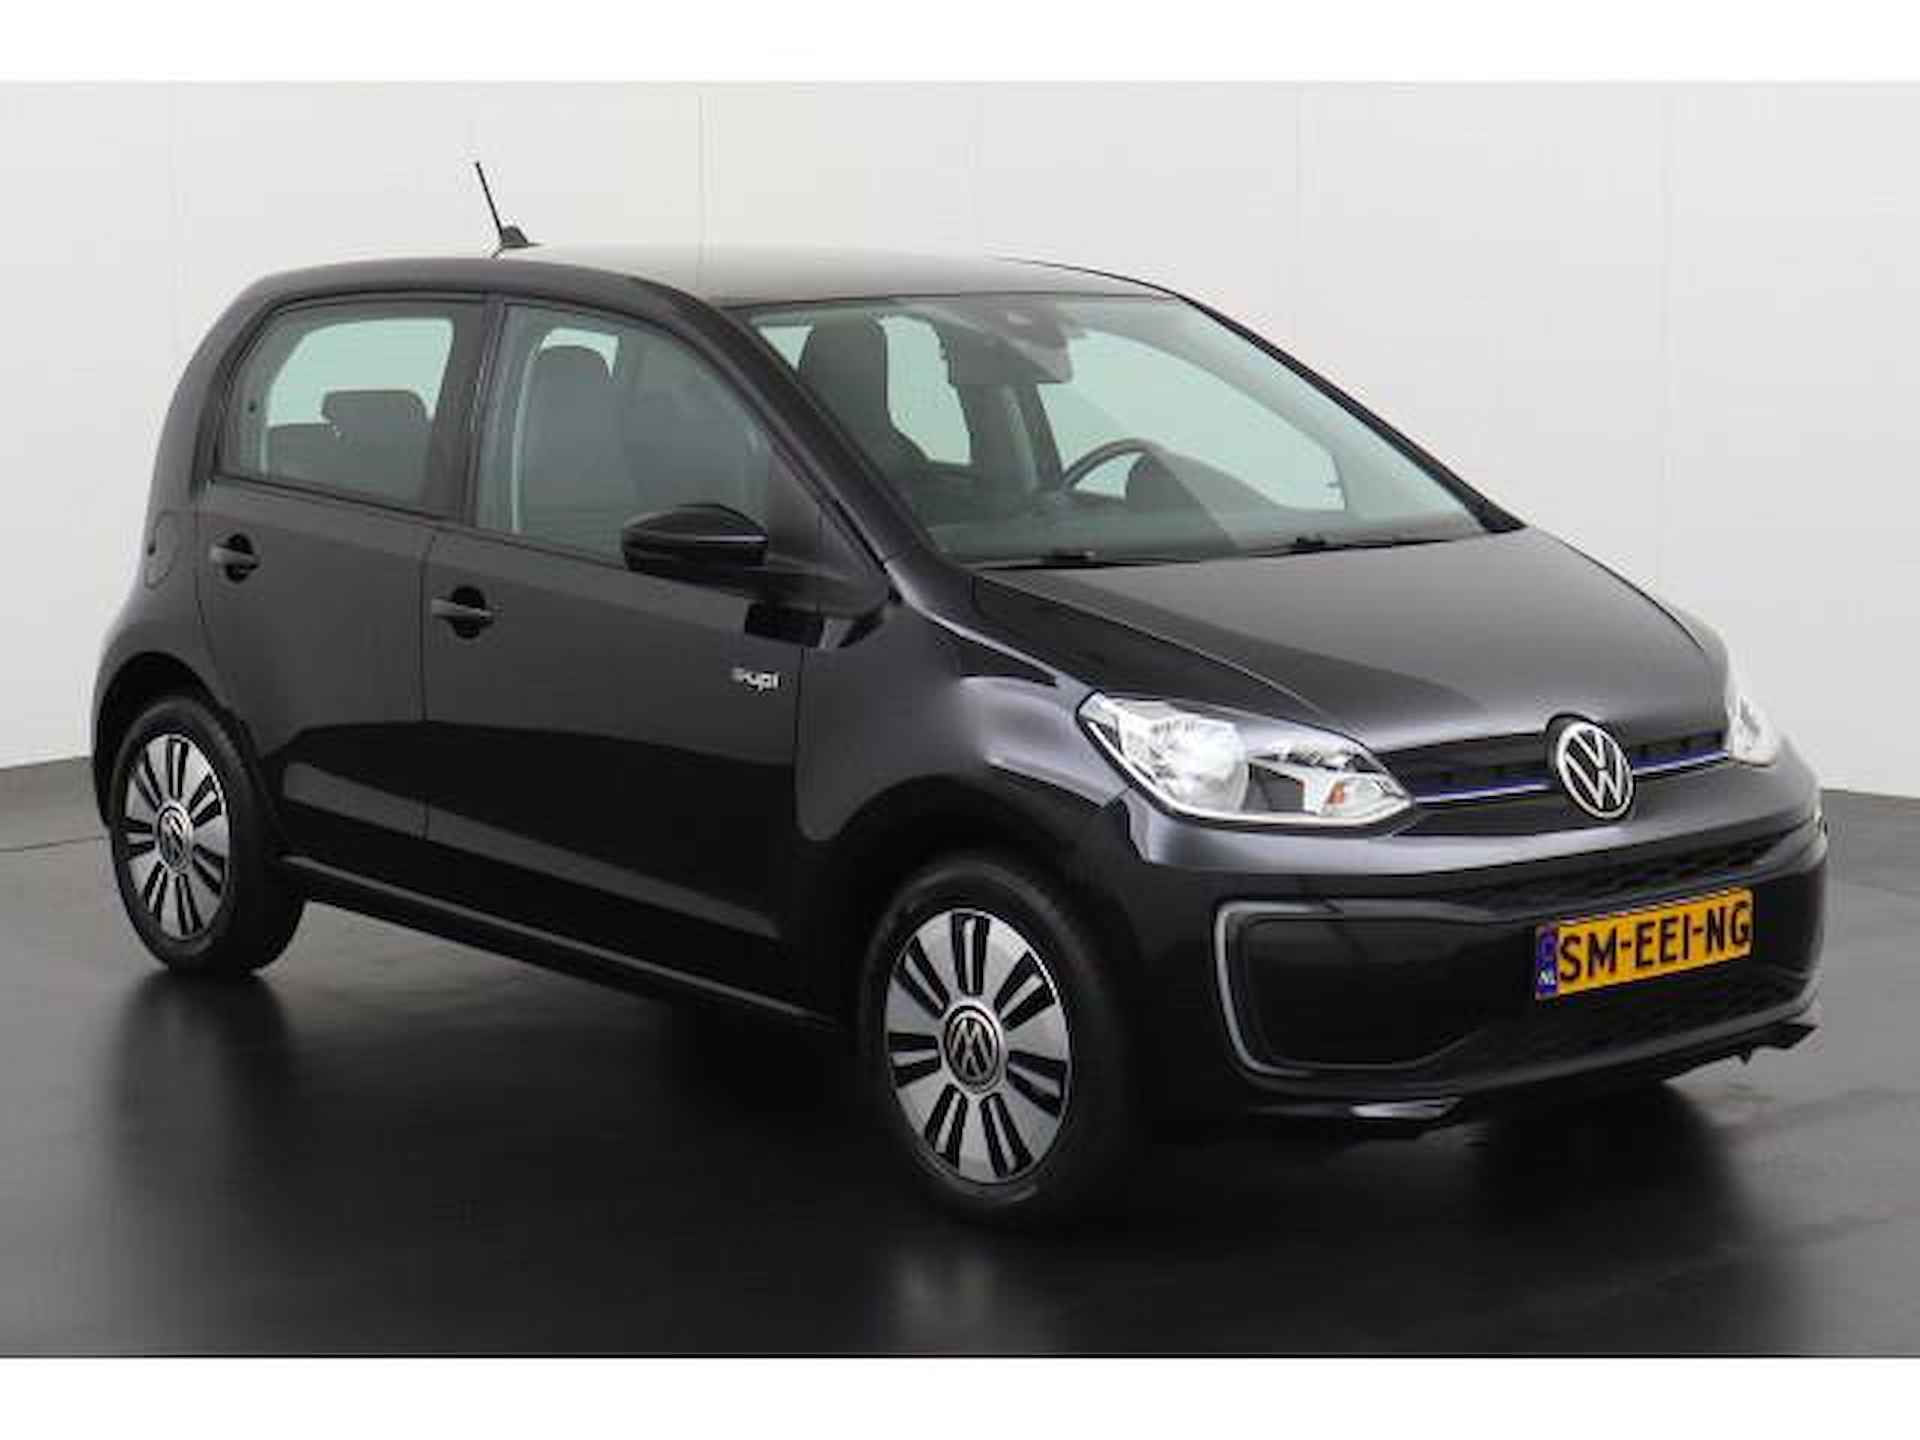 Volkswagen e-Up! 260KM WLTP | 14395 na subsidie | Camera | Zondag Open! - 2/6